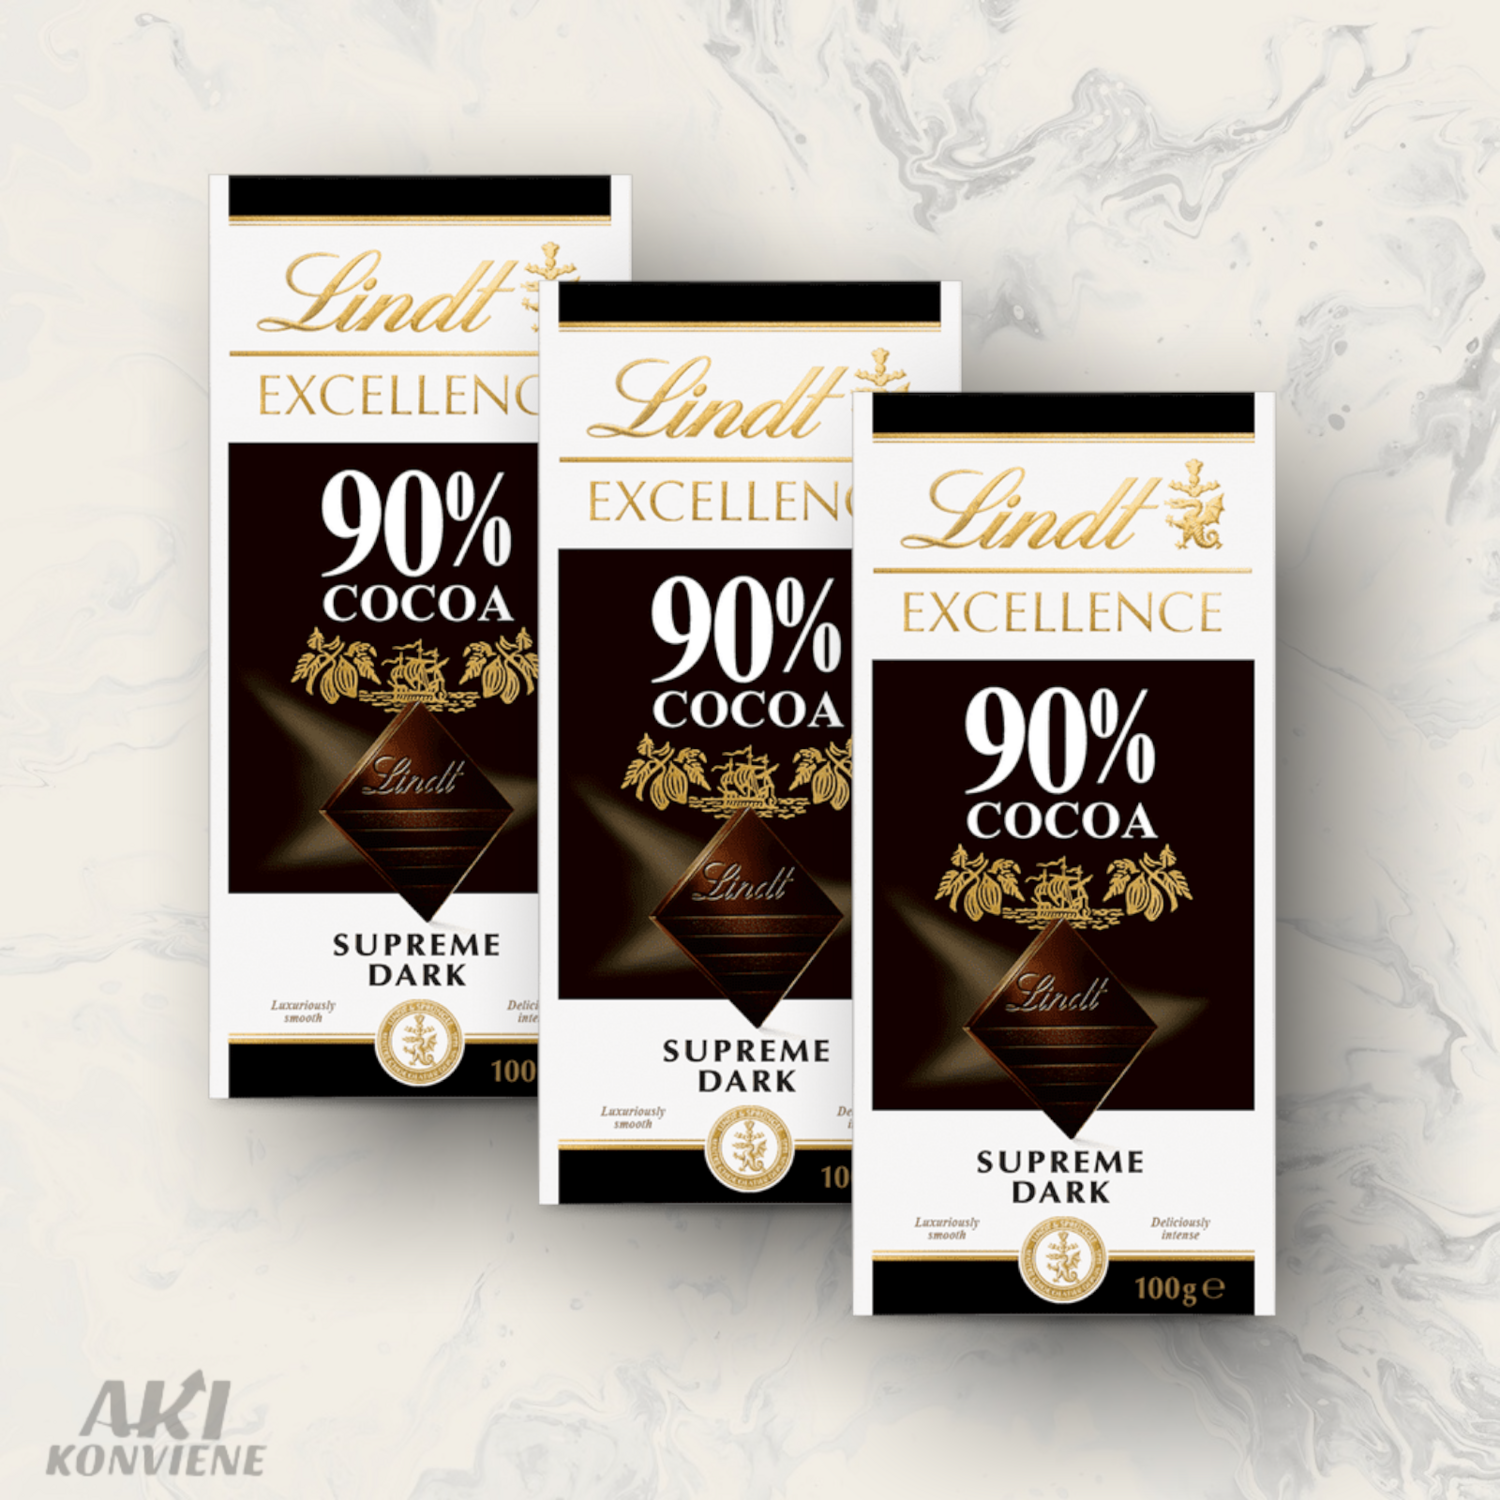 CHOCOLATE LINDT EXCELLENCE 90% COCOA 100G